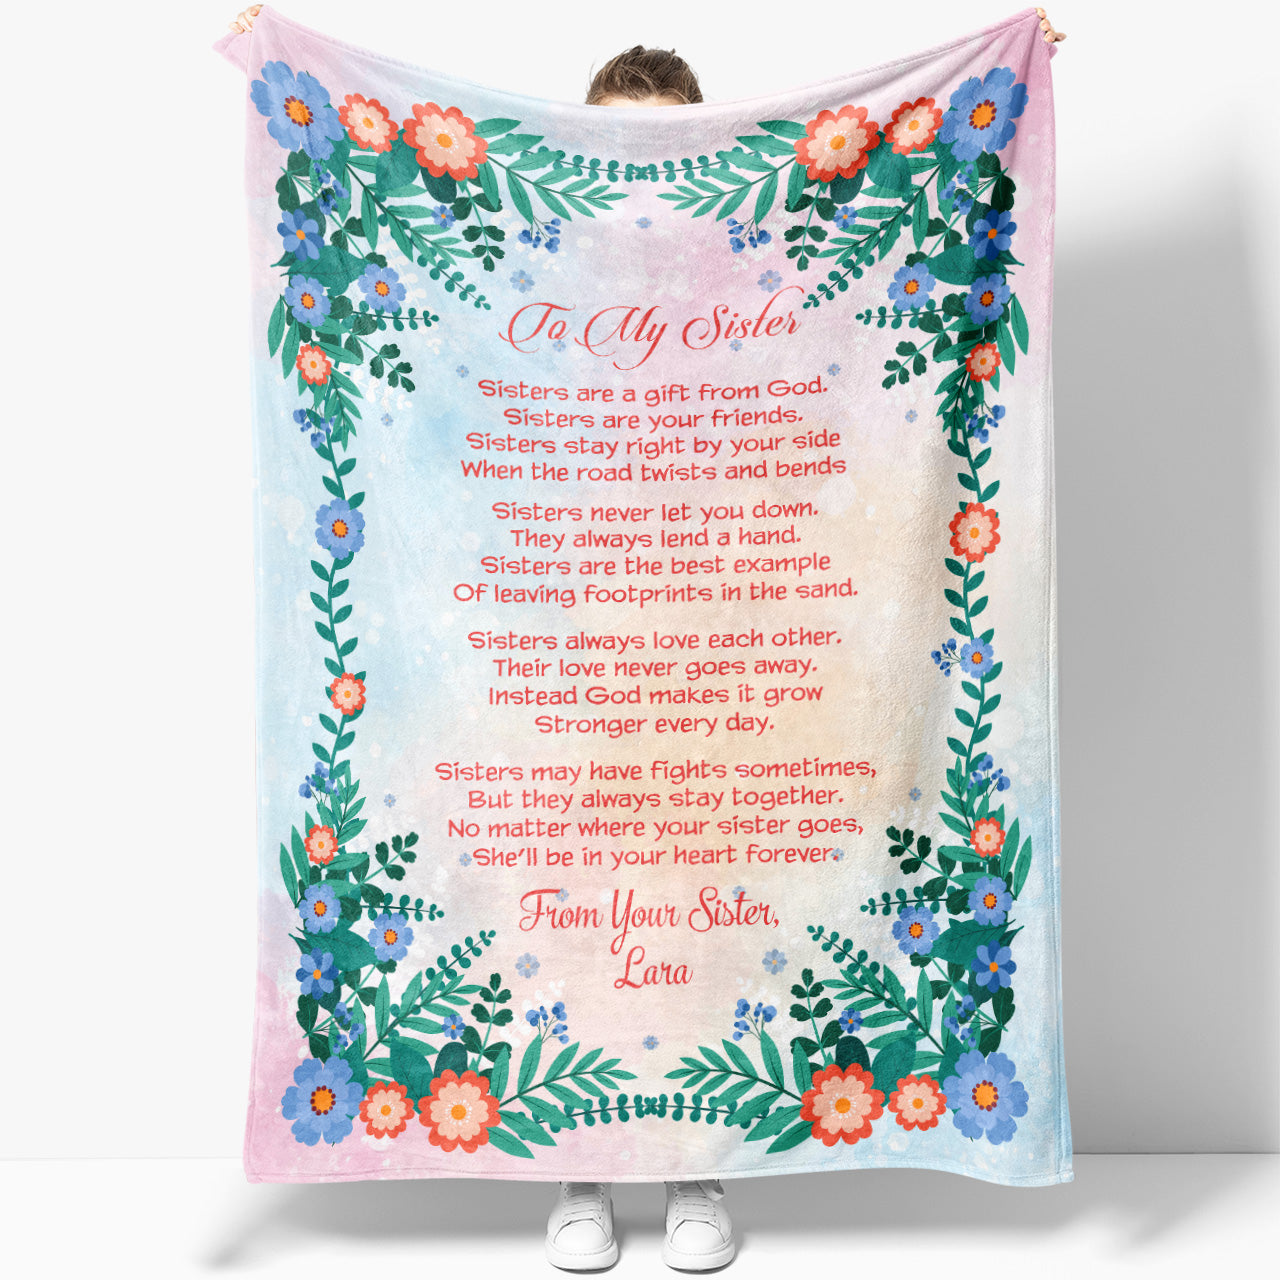 Blanket Gift Ideas To Sister, Sisters Never Let You Down Birthday Gift Blanket